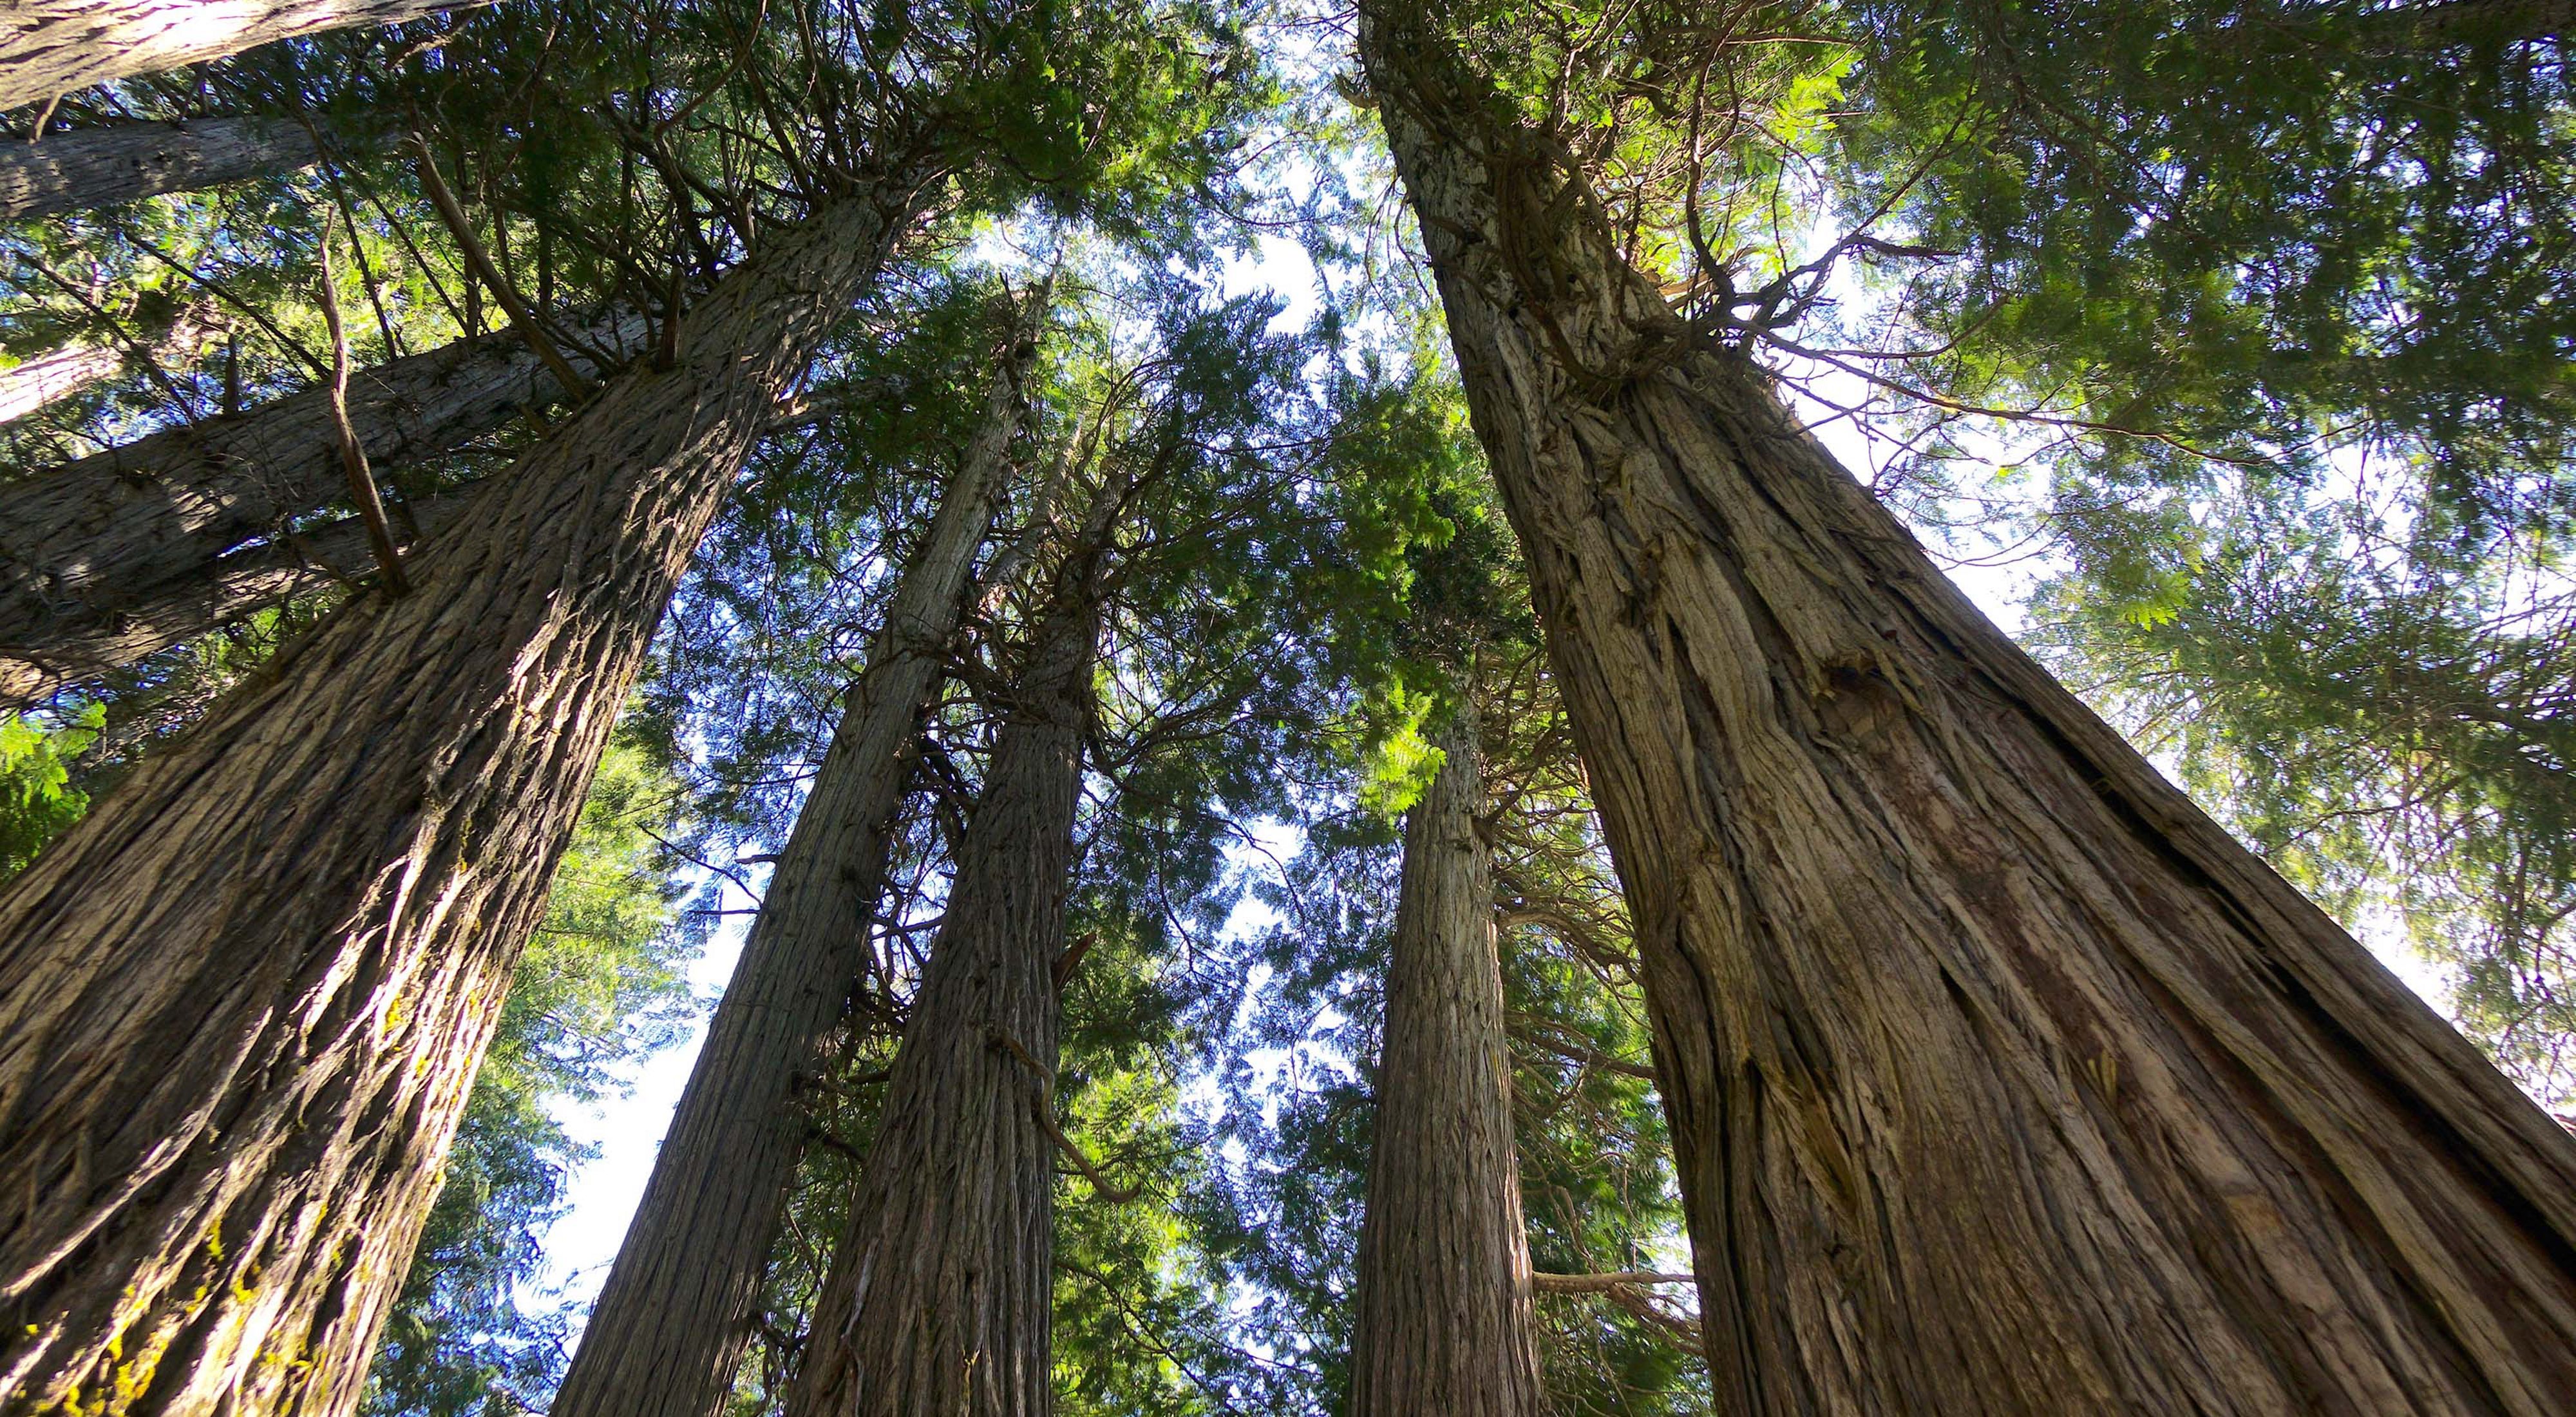 a photo looking up at the large trunks of old growth trees